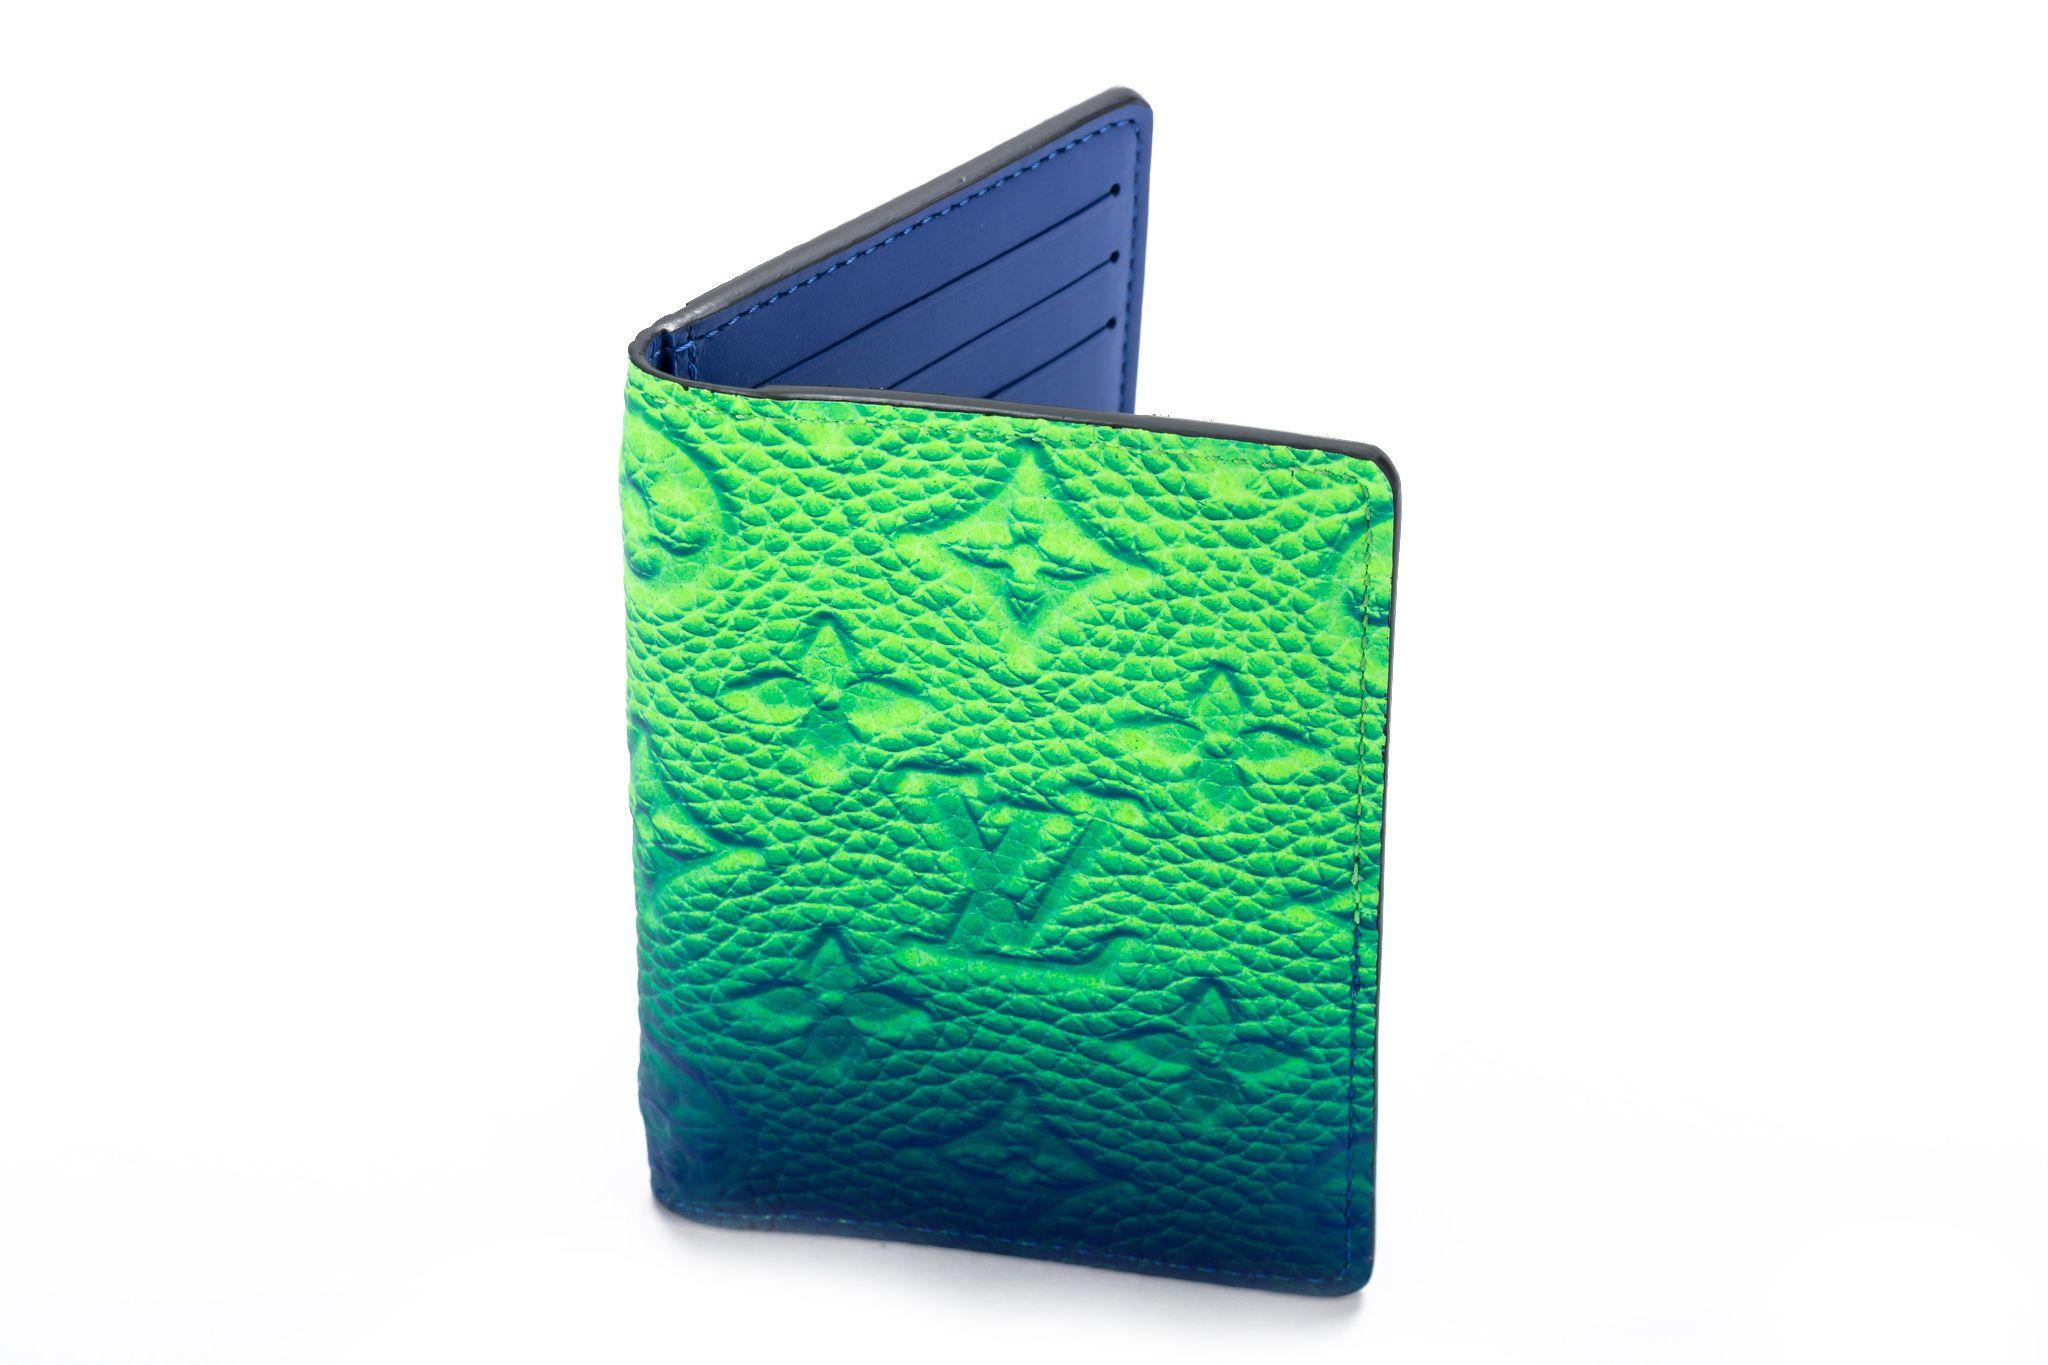 Beautiful credit card holder from the SS22 Louis Vuitton Virgil Abloh Illusion Mens collection. Stunning neon embossed leather with matching stitching. The classic Pocket Organizer, a practical all-in-one wallet, gets a futuristic make-over in